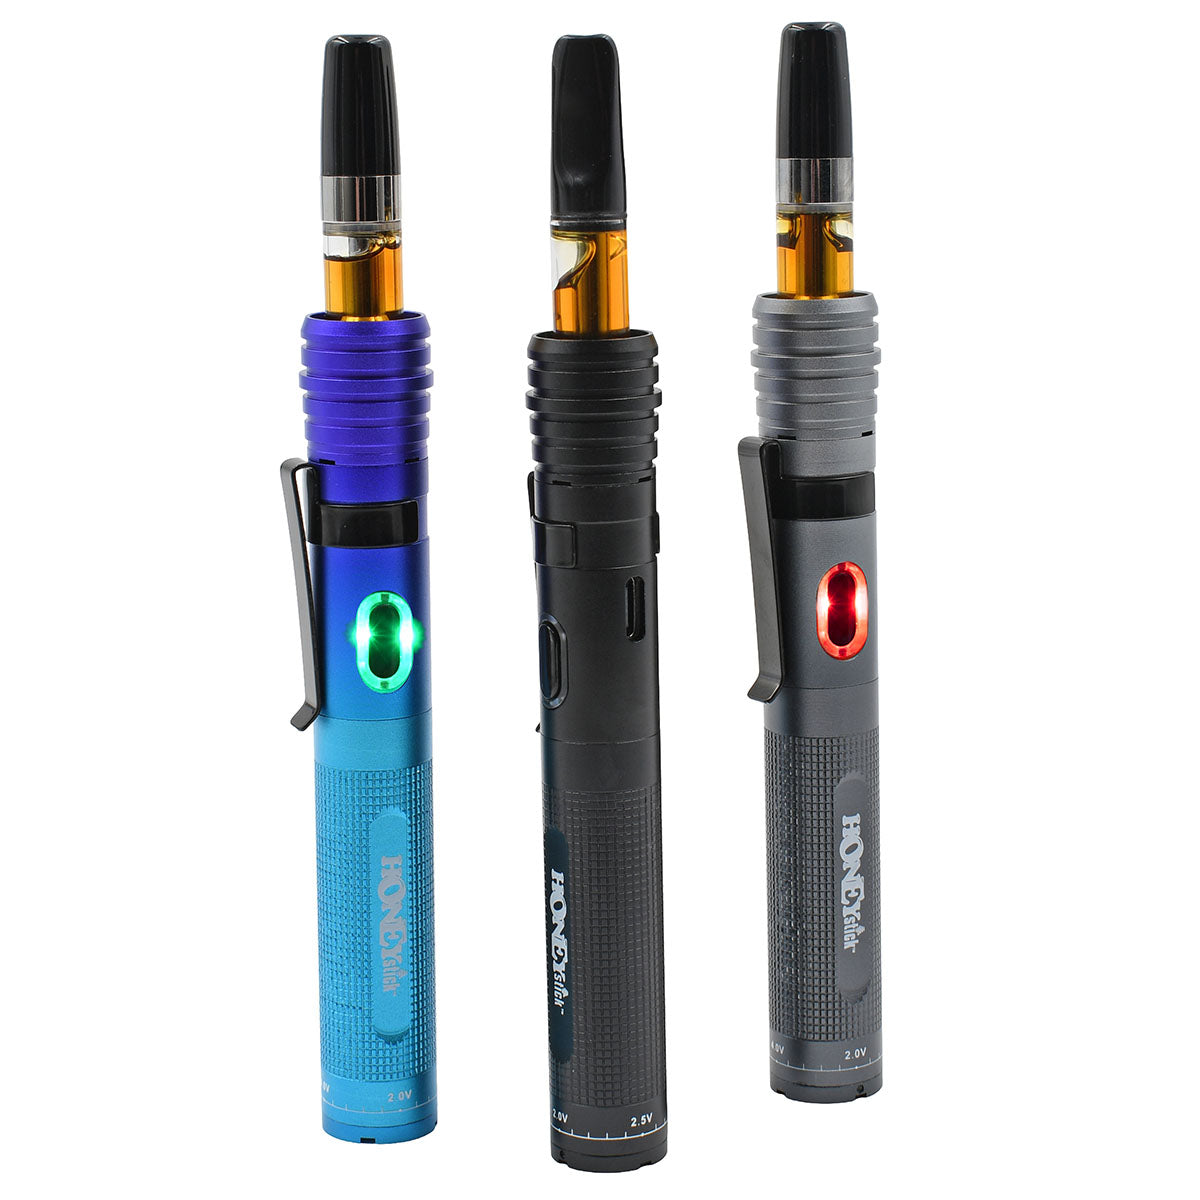 Tactical 510 Cart Pen with Twist VV. 650mAh Vape Battery in 3 color options.